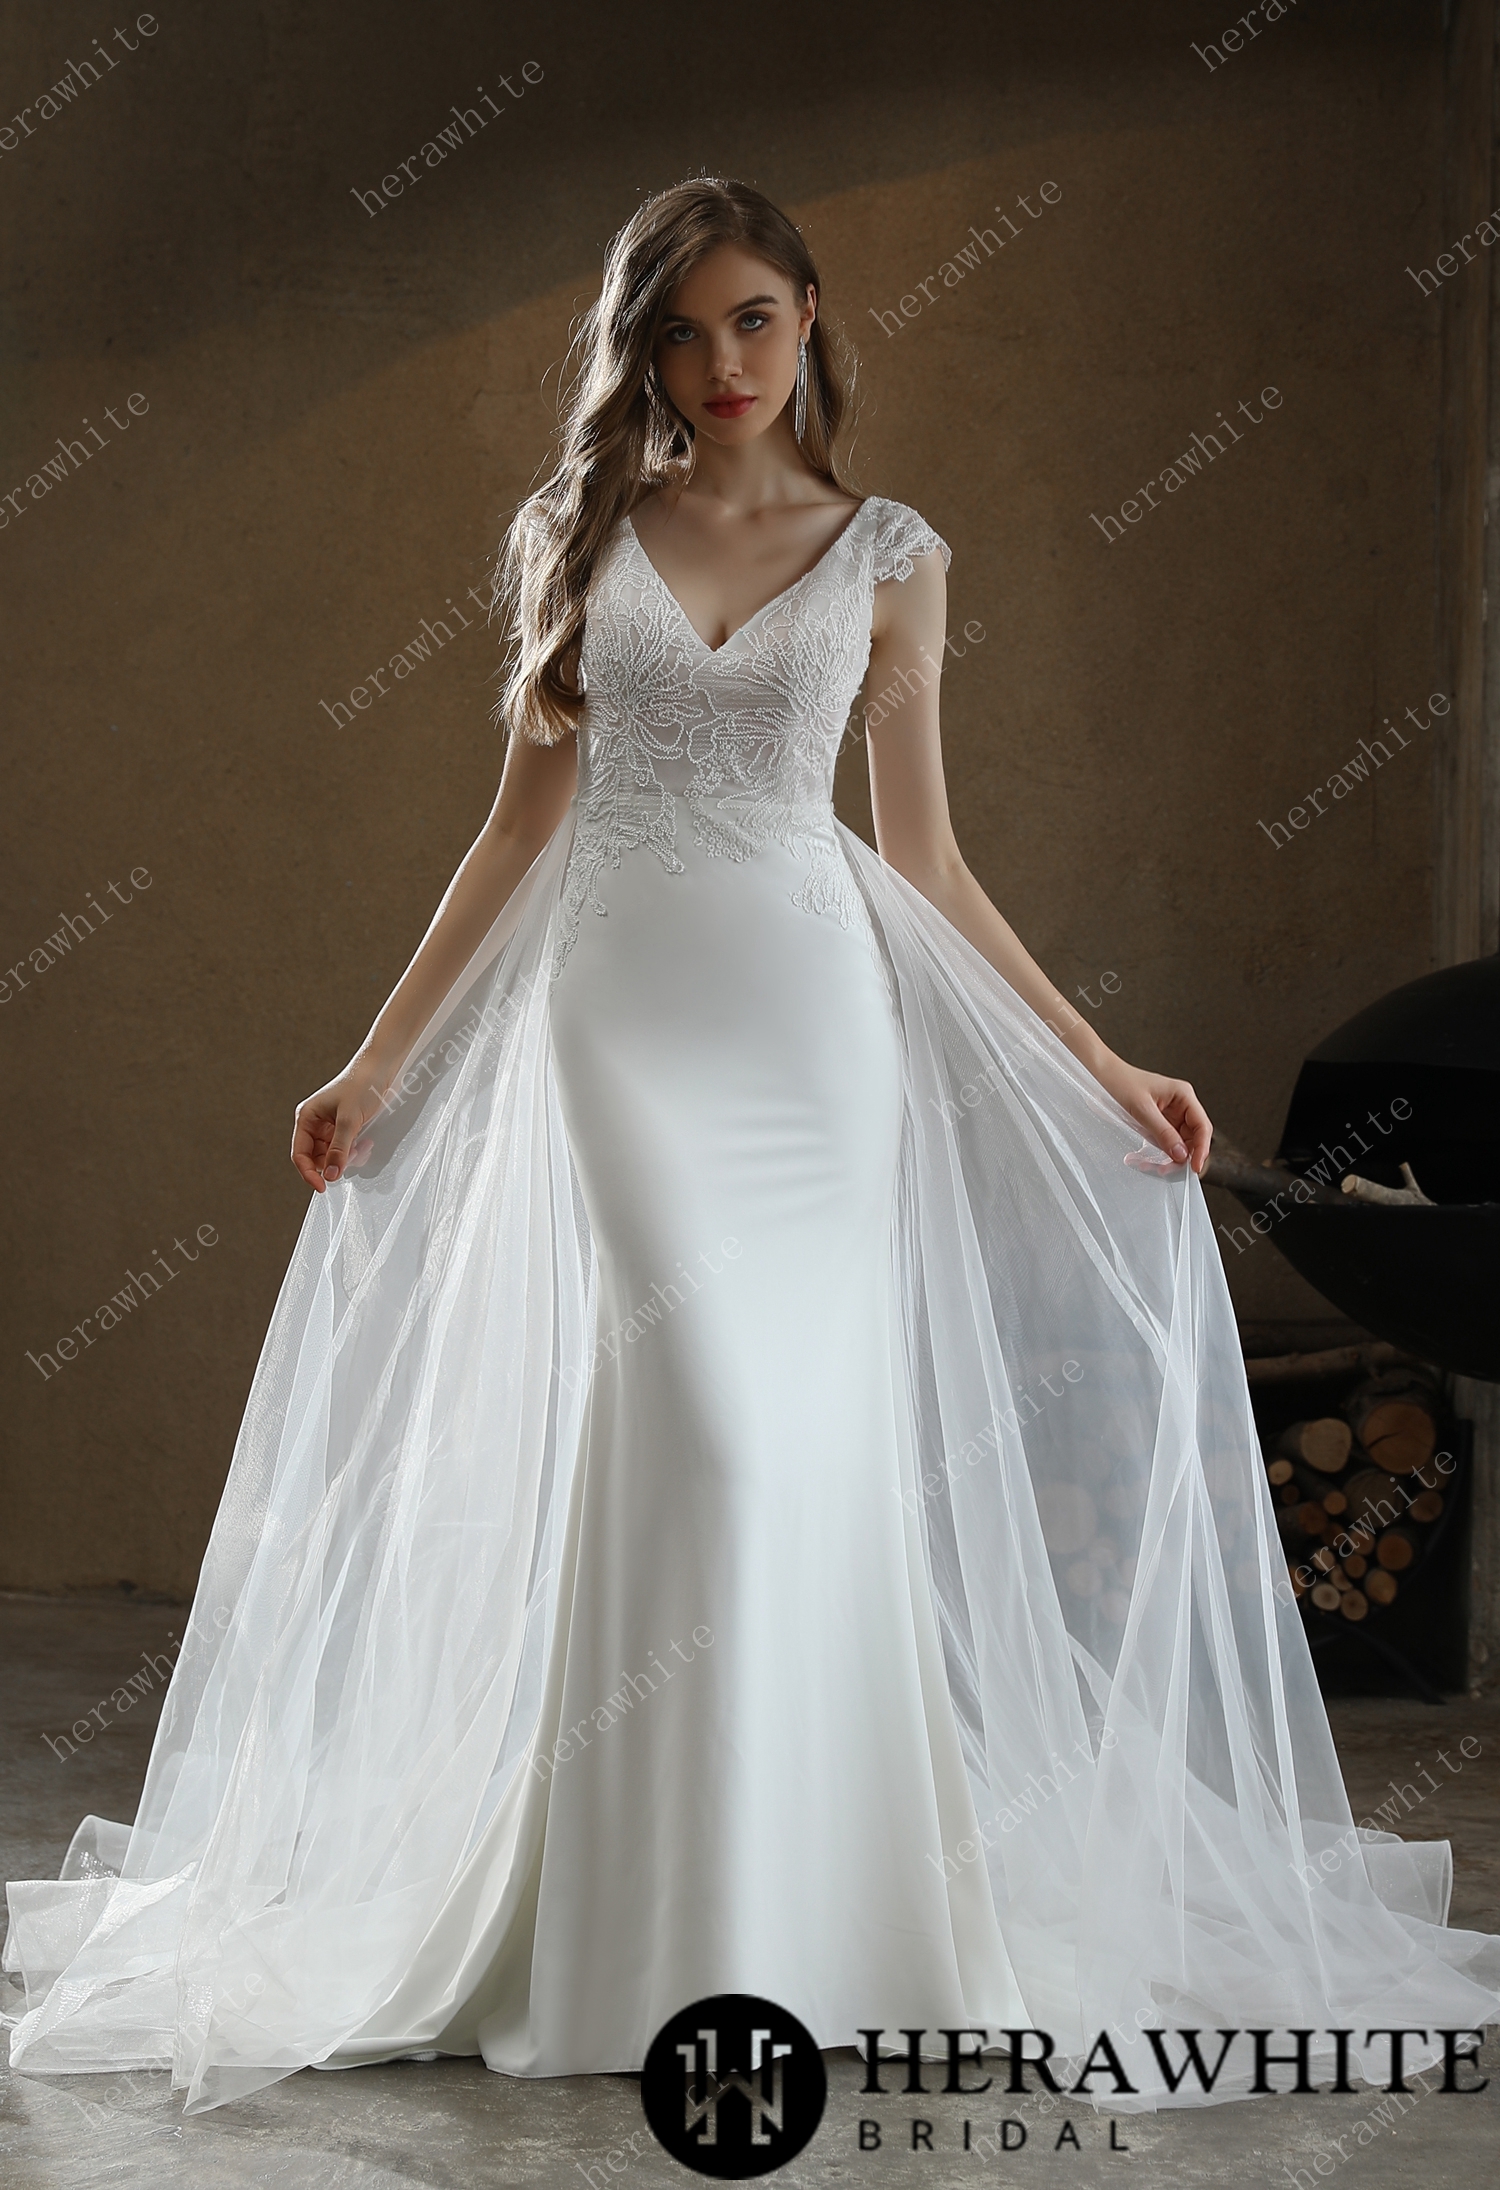 Crepe Sheath Wedding Dress with Lace Cap Sleeves